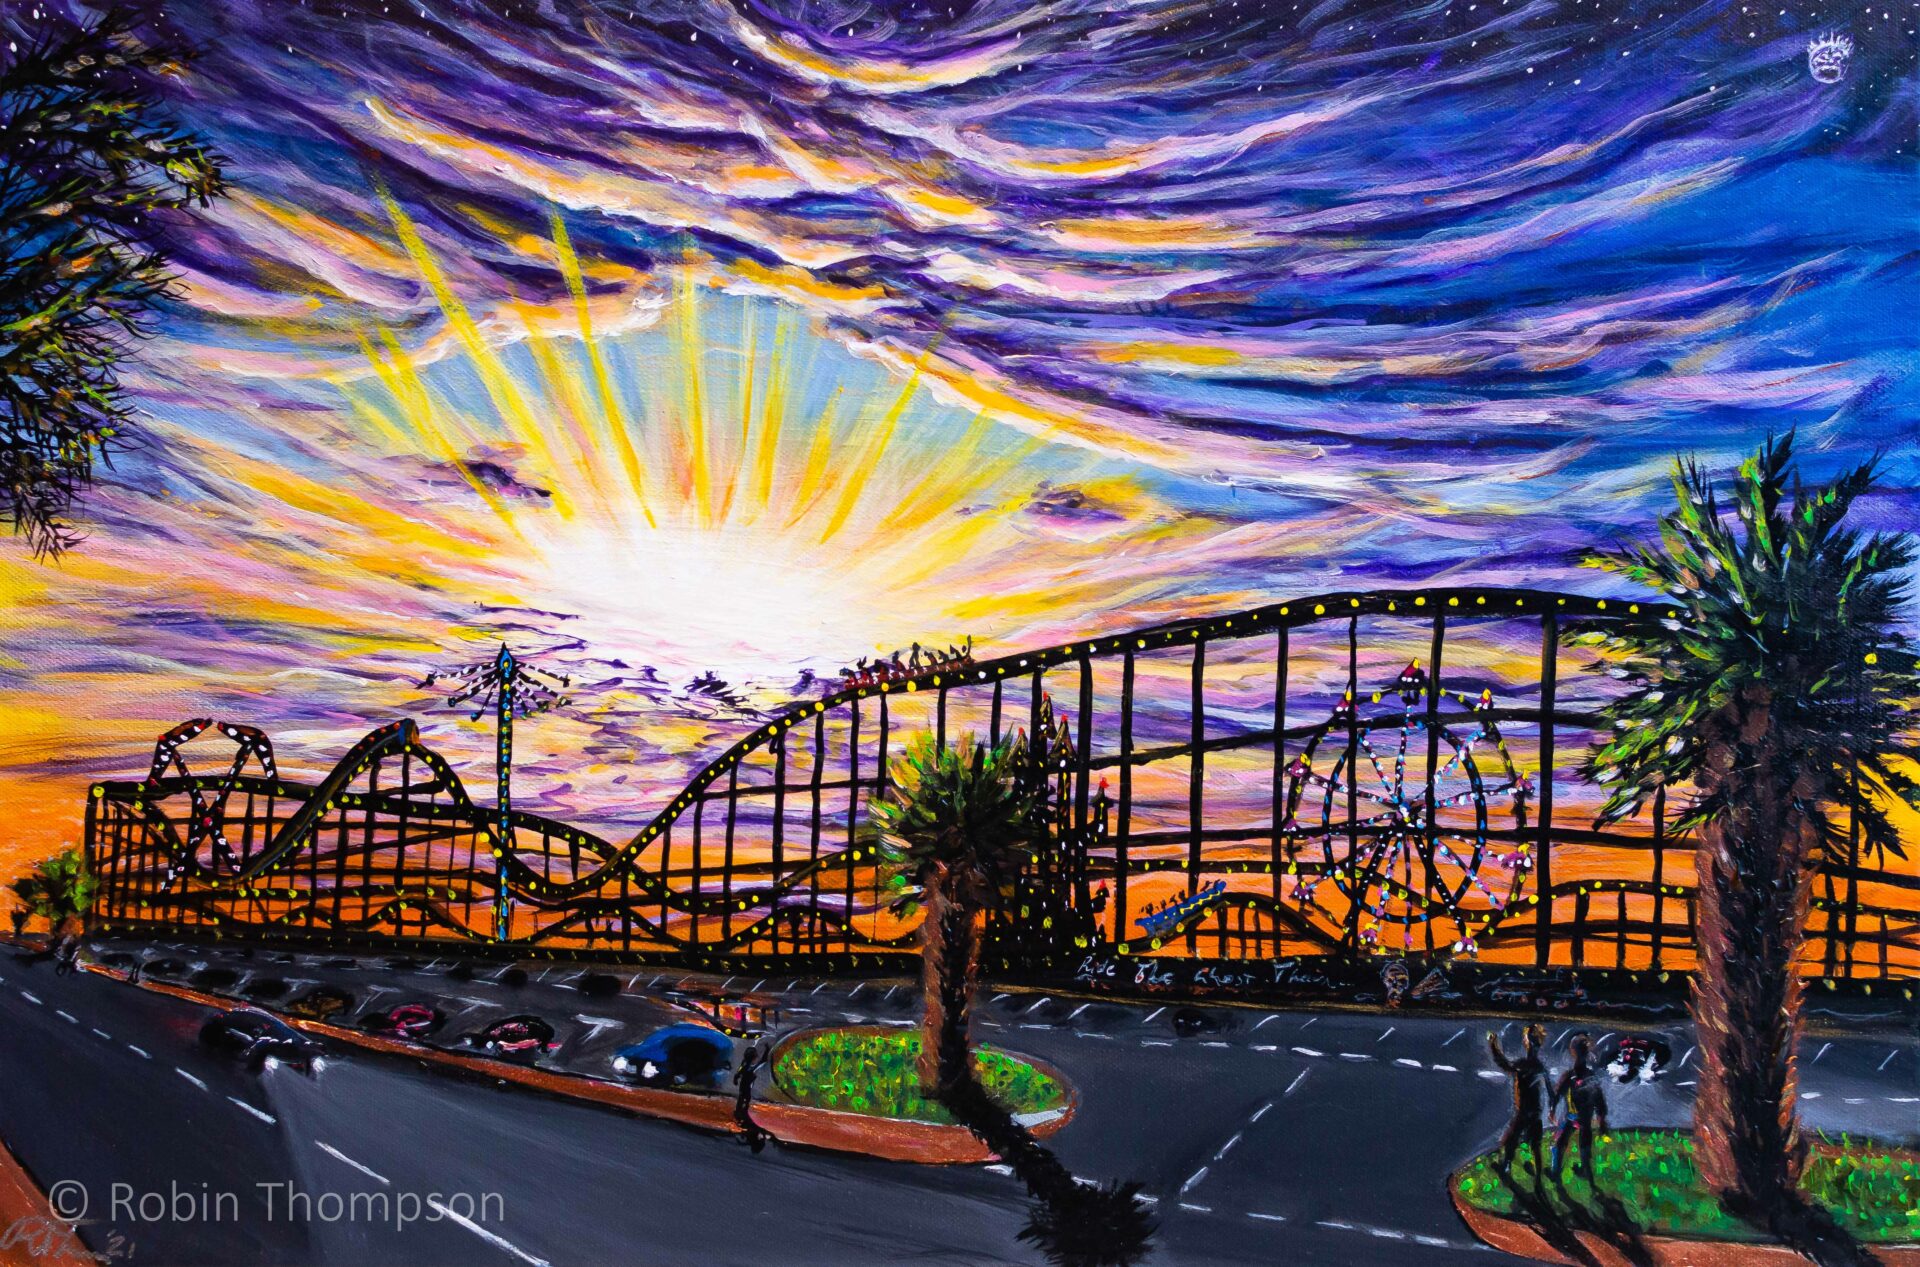 A colourful scene portraying an amusement park at dusk, with blues/yellows/oranges/purples across a starry sky and dramatic clouds. Figures are seen in the foreground watching the rollercoaster, and a car is headed in the direction of the viewer.